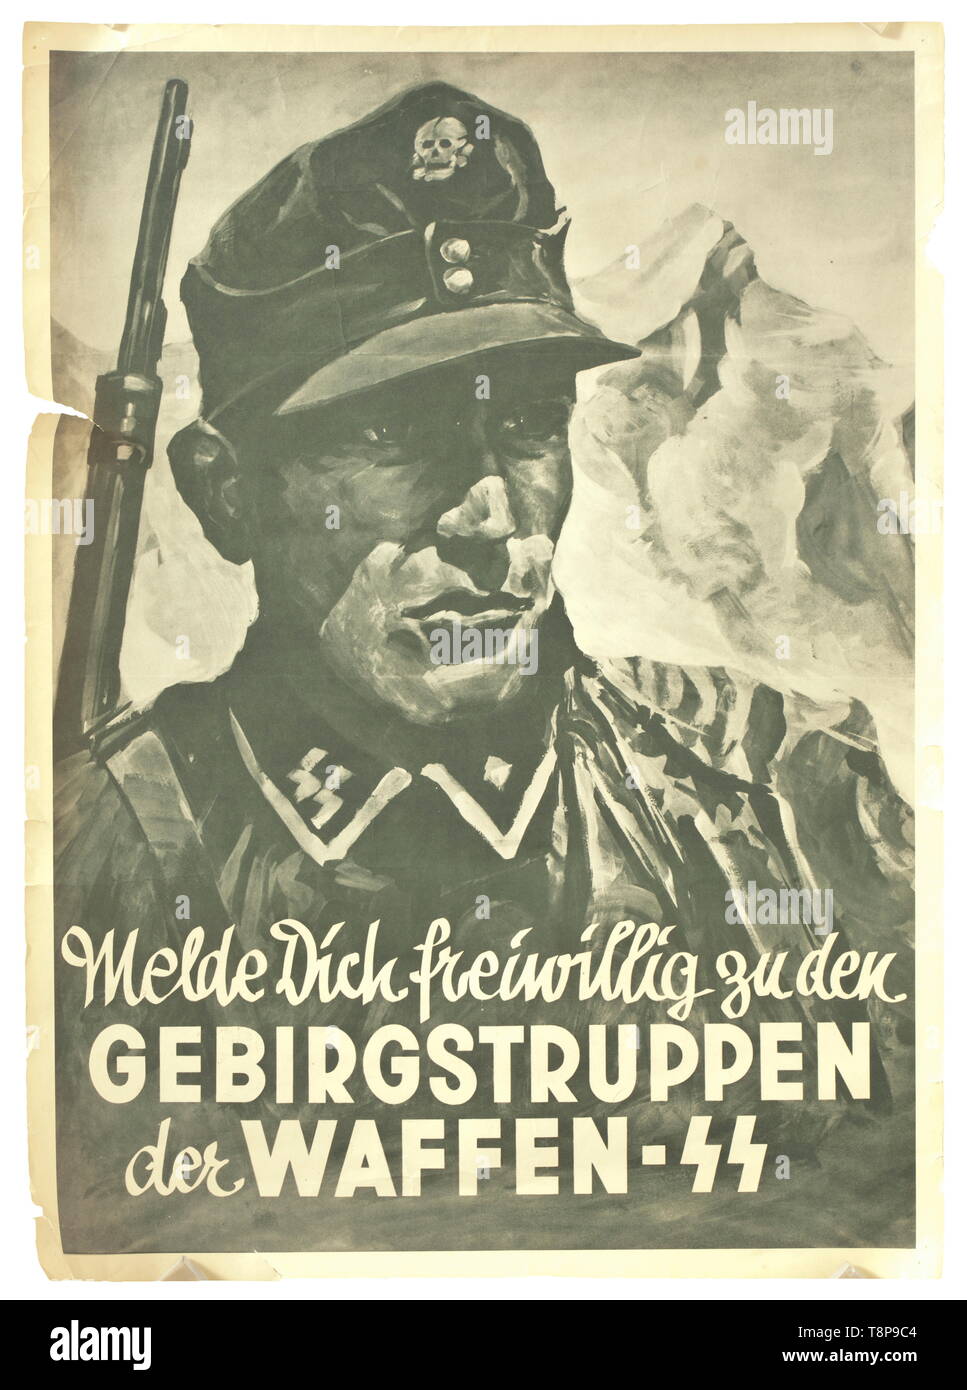 Recruitment poster 'Melde Dich freiwillig zu den Gebirgstruppen der Waffen-SS' ('Sign up voluntarily for the mountain troops of the Waffen-SS') Designed by Ottomar Anton, after 1939, issued by the SS head office/supplementary office of the Waffen-SS, Berlin W 35, dimensions 57 x 42 cm, rolled. Extremely rare. Comes with a poster relating to the referendum on 10 April 1938 on the reunification of Austria with the German Reich, portrait of Adolf Hitler, underneath 'Ja!', dimensions 42.5 x 30 cm. Both posters are damaged. Ottomar Anton (1895 - 1976), painter, graphic artist an, Editorial-Use-Only Stock Photo